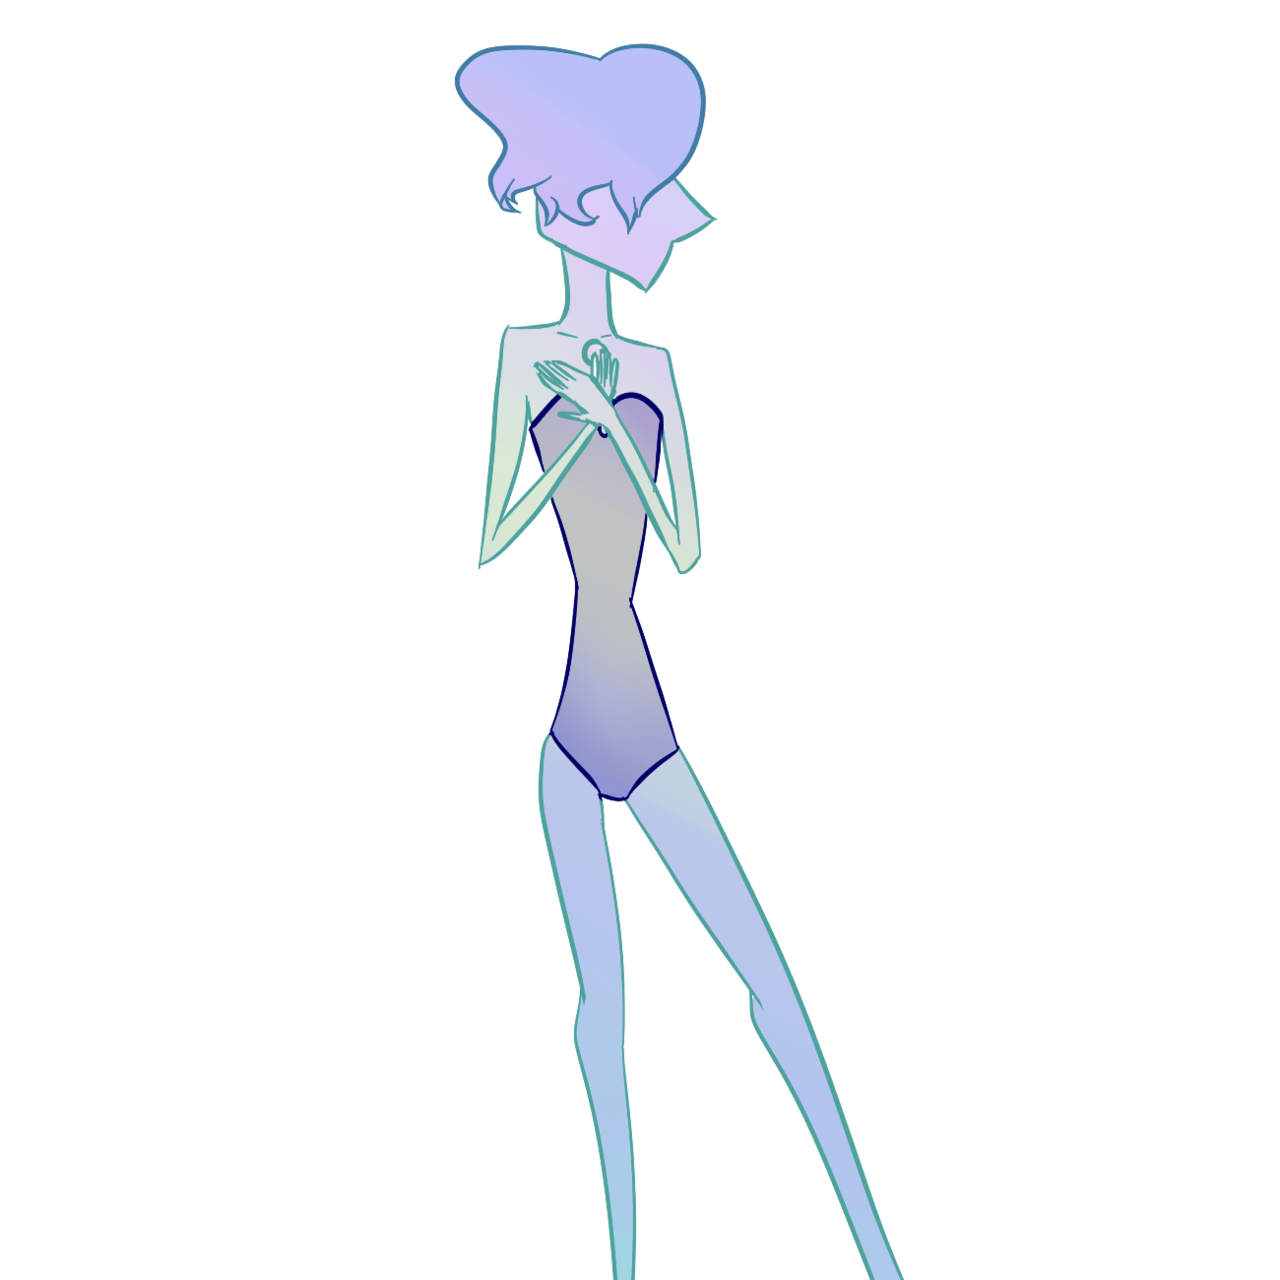 Here’s a bloo doodle.